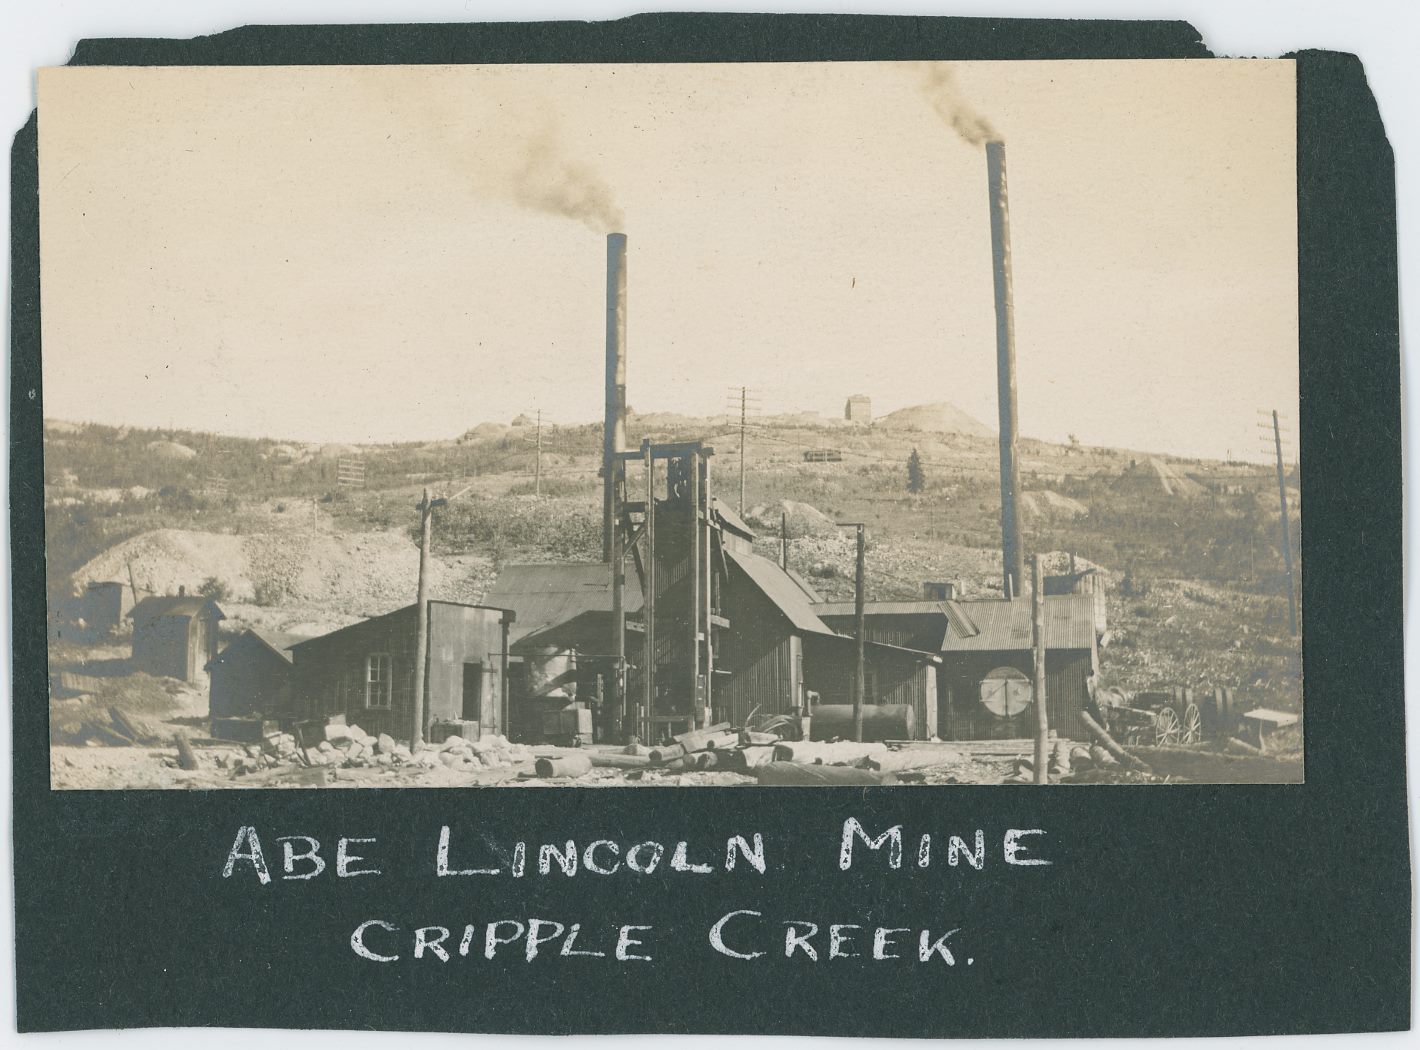 Sadly, being of type Snapshot this image is not the best one around in terms of quality such as sharpness and bring forward what hides in the more darker parts of the image, but the overall scene is quite a nice one, and a workable look at the Surface Structures of the Abe Lincoln Mine in Poverty Gulch with Gold Hill in the background.
   I do not see any signs of the Short Line Roadbed, but I do see a Trolley high up on the high Line, I think it is coming down the line, but the image quality is not good enough to find the Trolley roof pole and see where it is raised up to the wire to tell for sure the direction. But, this helps date this image to be from sometime between January 3, 1898 (when regular Trolley Service to Victor started) and middle of September 1903 when the Original High Line section of the track where the Trolley is located was closed/abandoned. 
